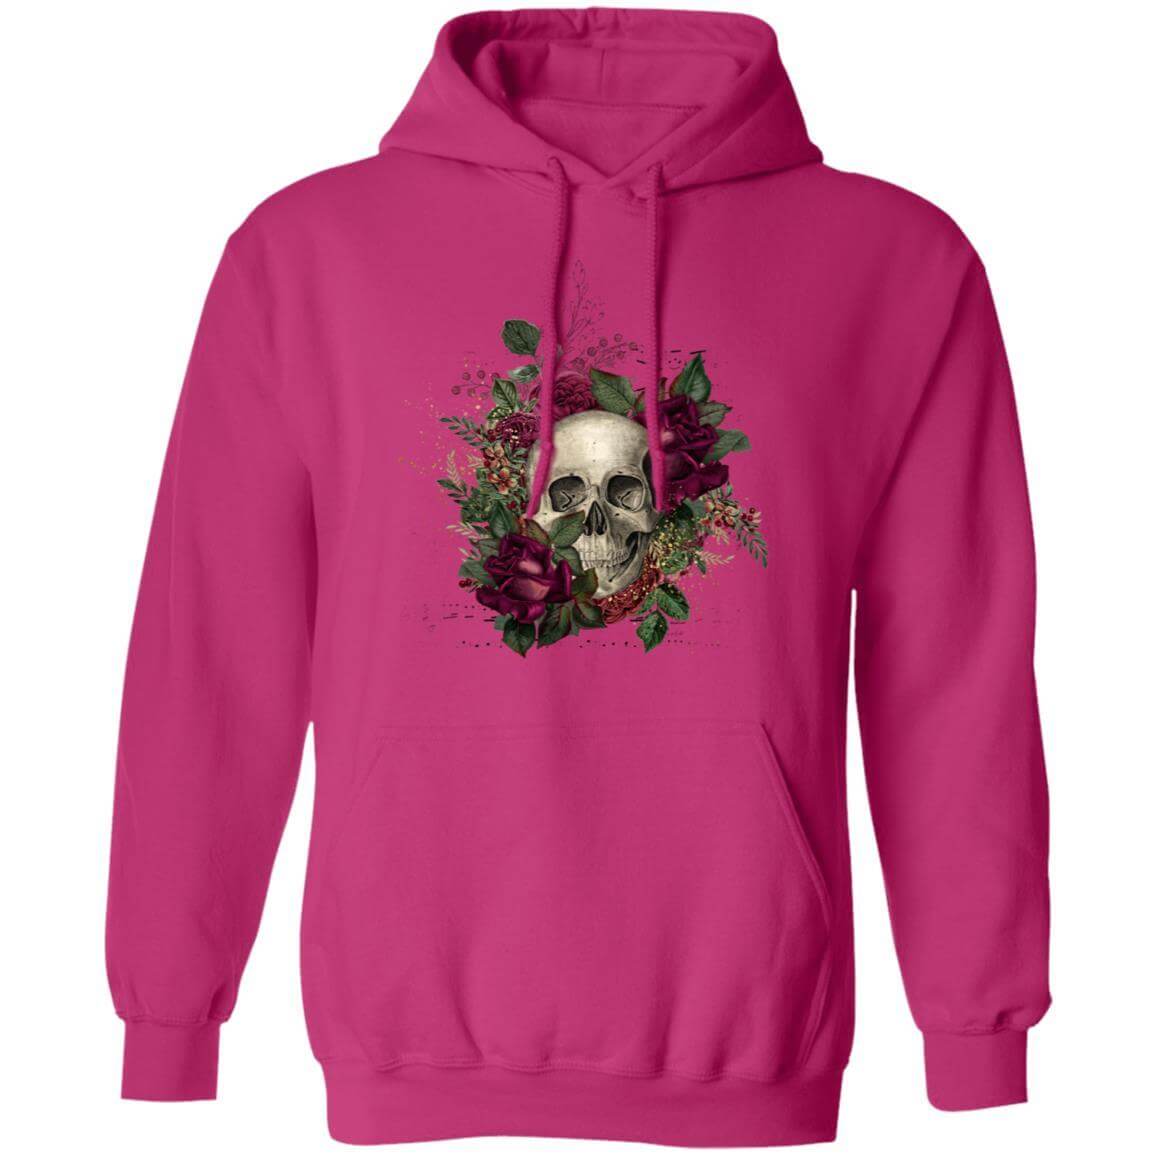 Sweatshirts Heliconia / S Winey Bitches Co Floral Skull Design #2 Pullover Hoodie 8 oz. WineyBitchesCo